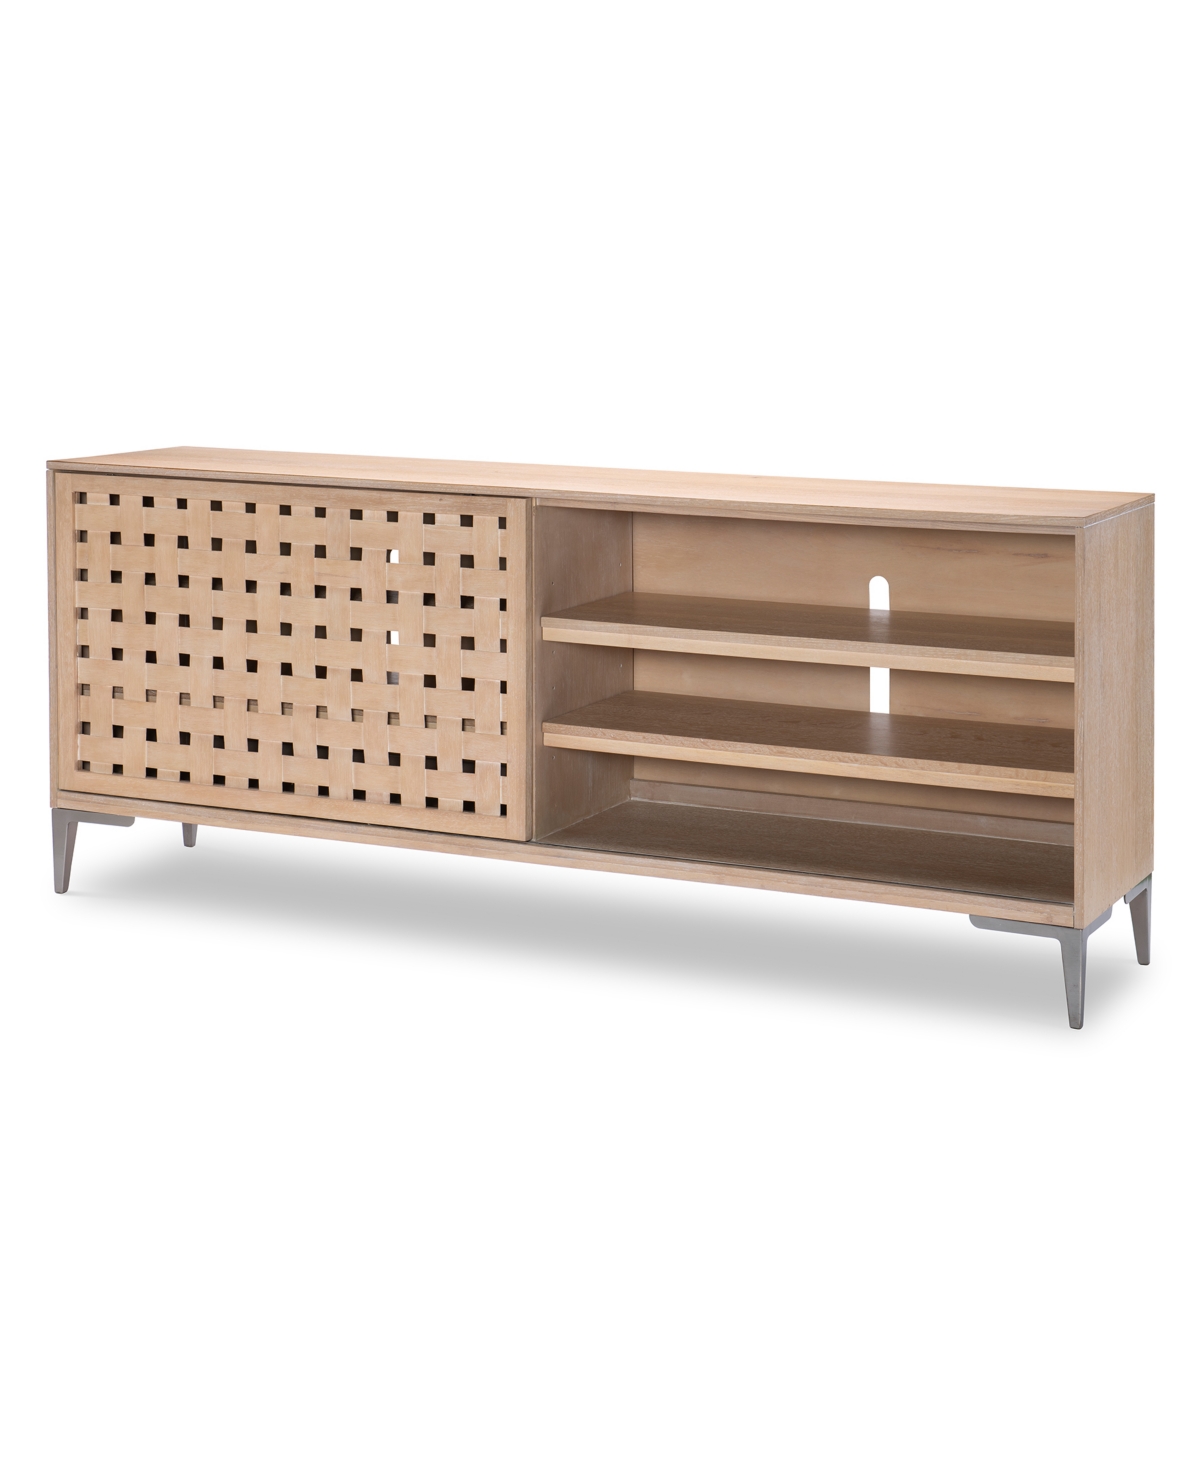 Furniture Legacy Classic Biscayne 80" Wood Entertainment Console In Malabar With Alabaster Fronts